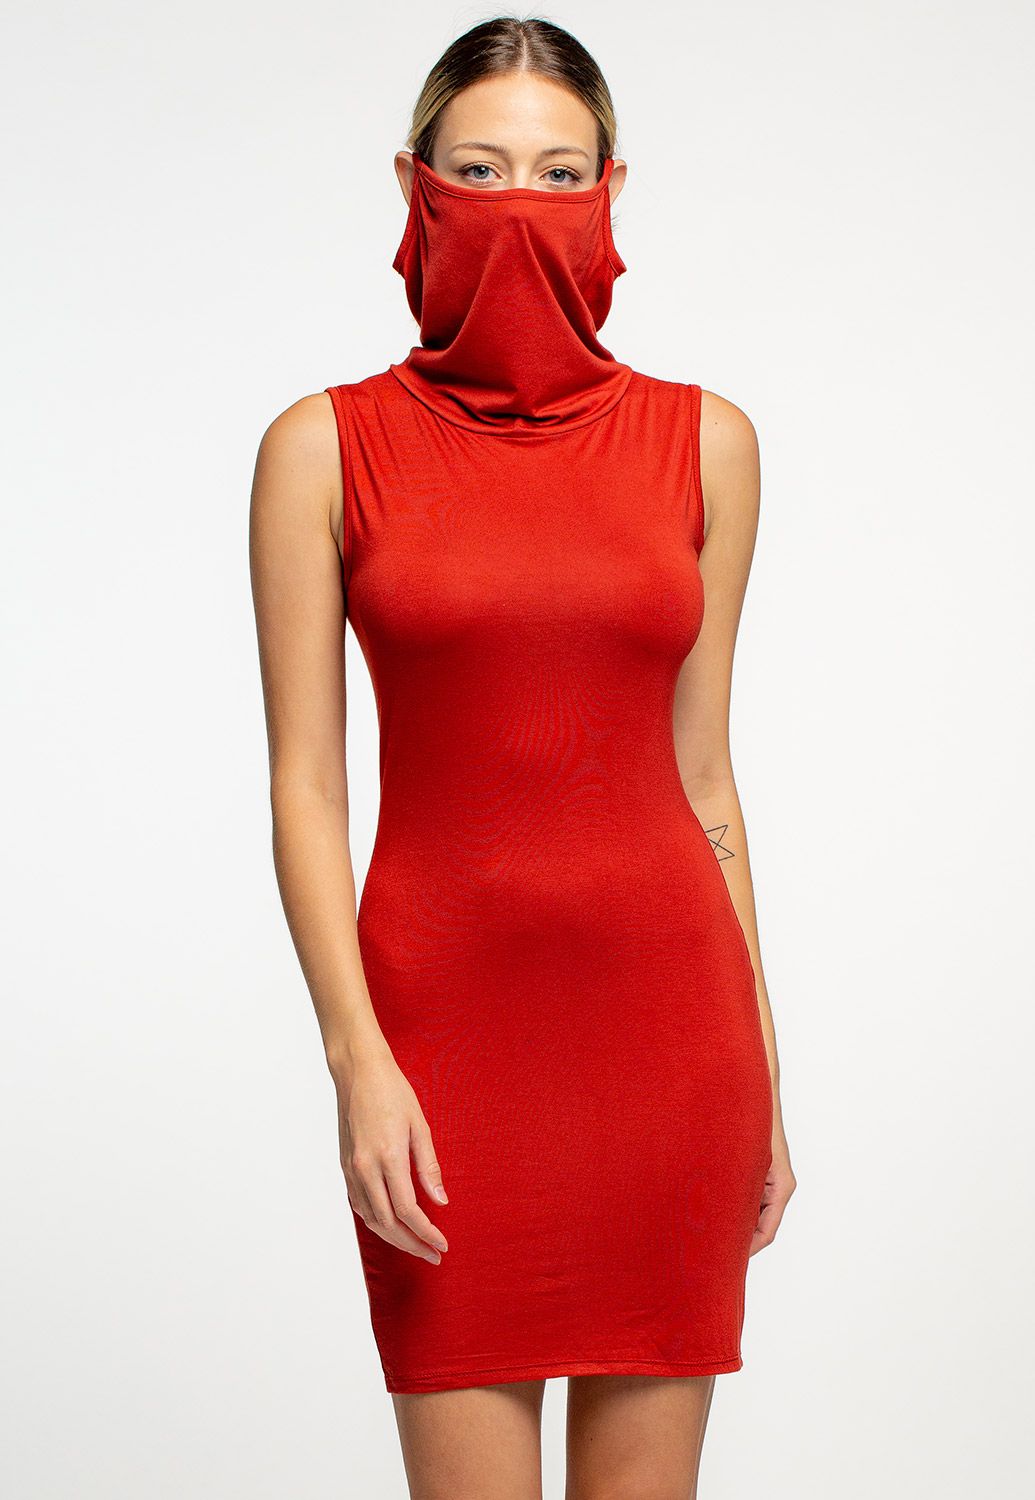 Basic Face Cover Up Cowl Neck Dress 